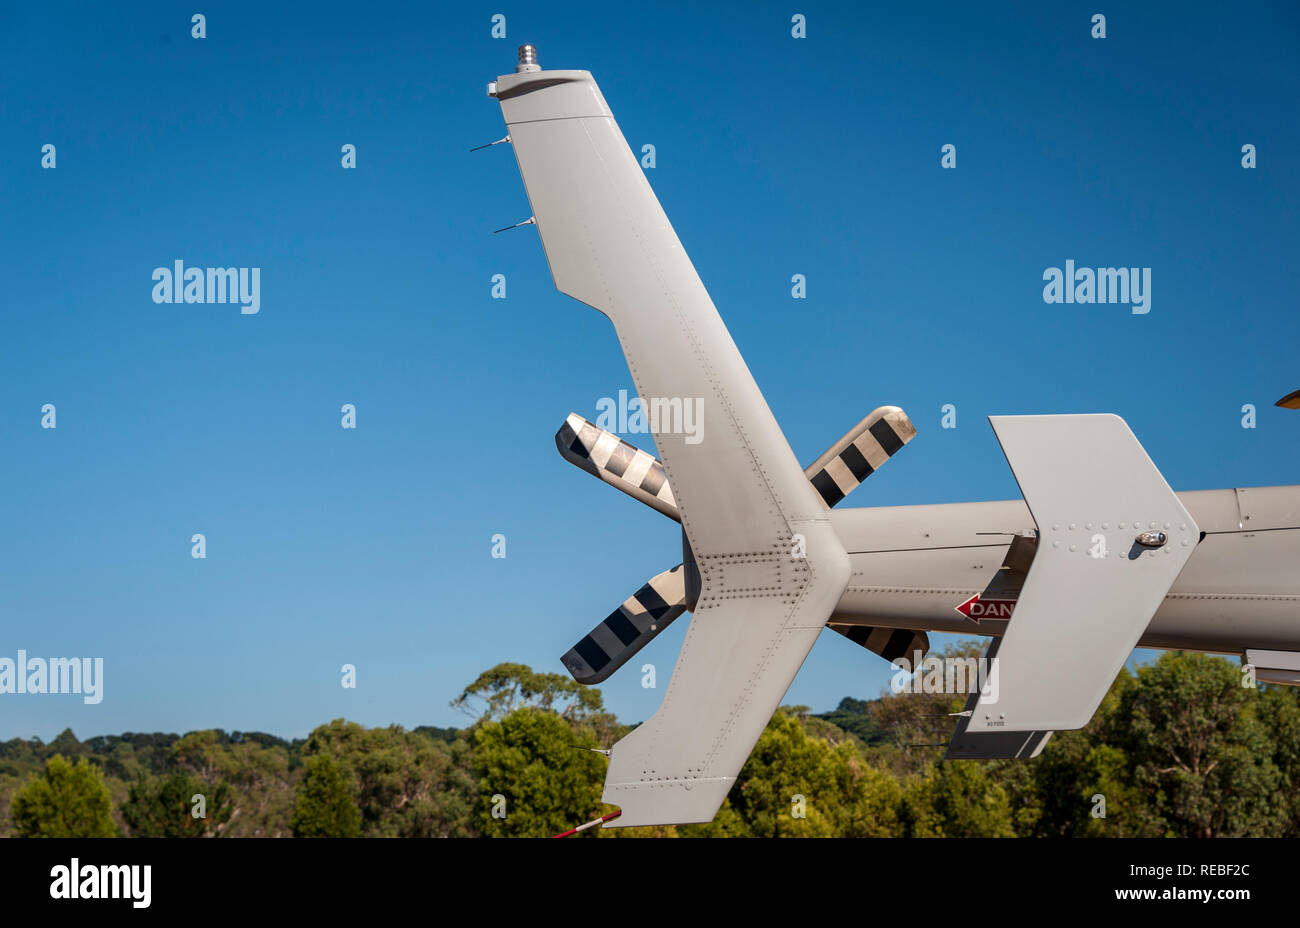 Detail of the tail of a modern military helicopter against trees and a blue sky Stock Photo